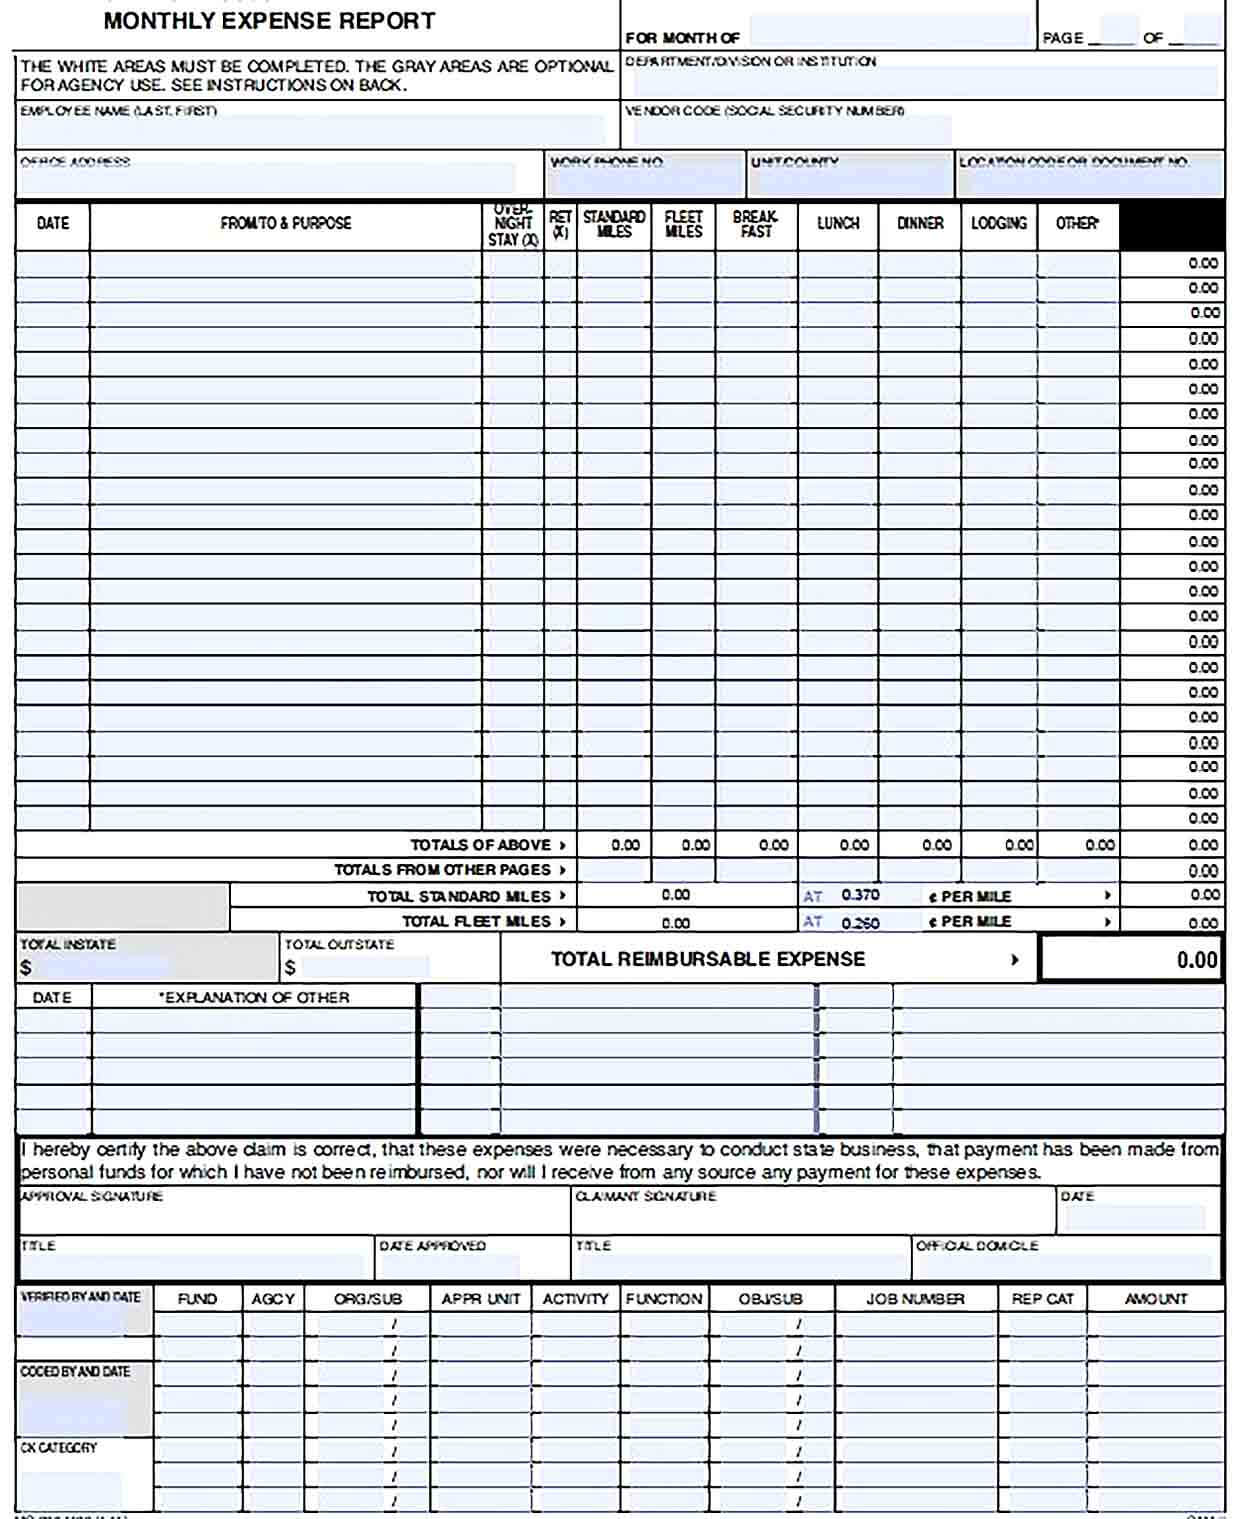 Sample Sample Monthly Expense Report